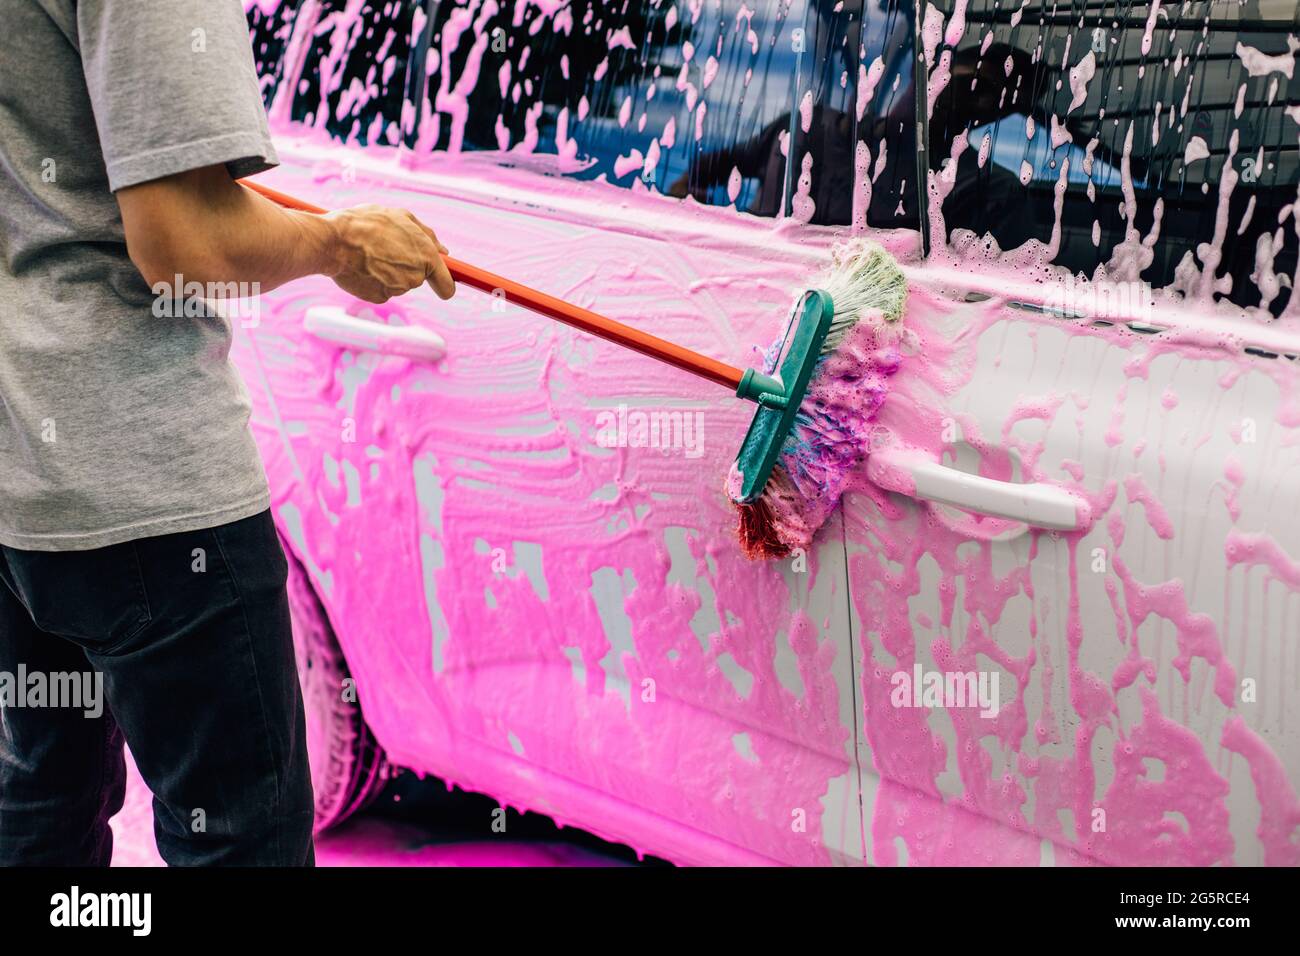 Worker washing a white car with a brush, at a car wash, a man